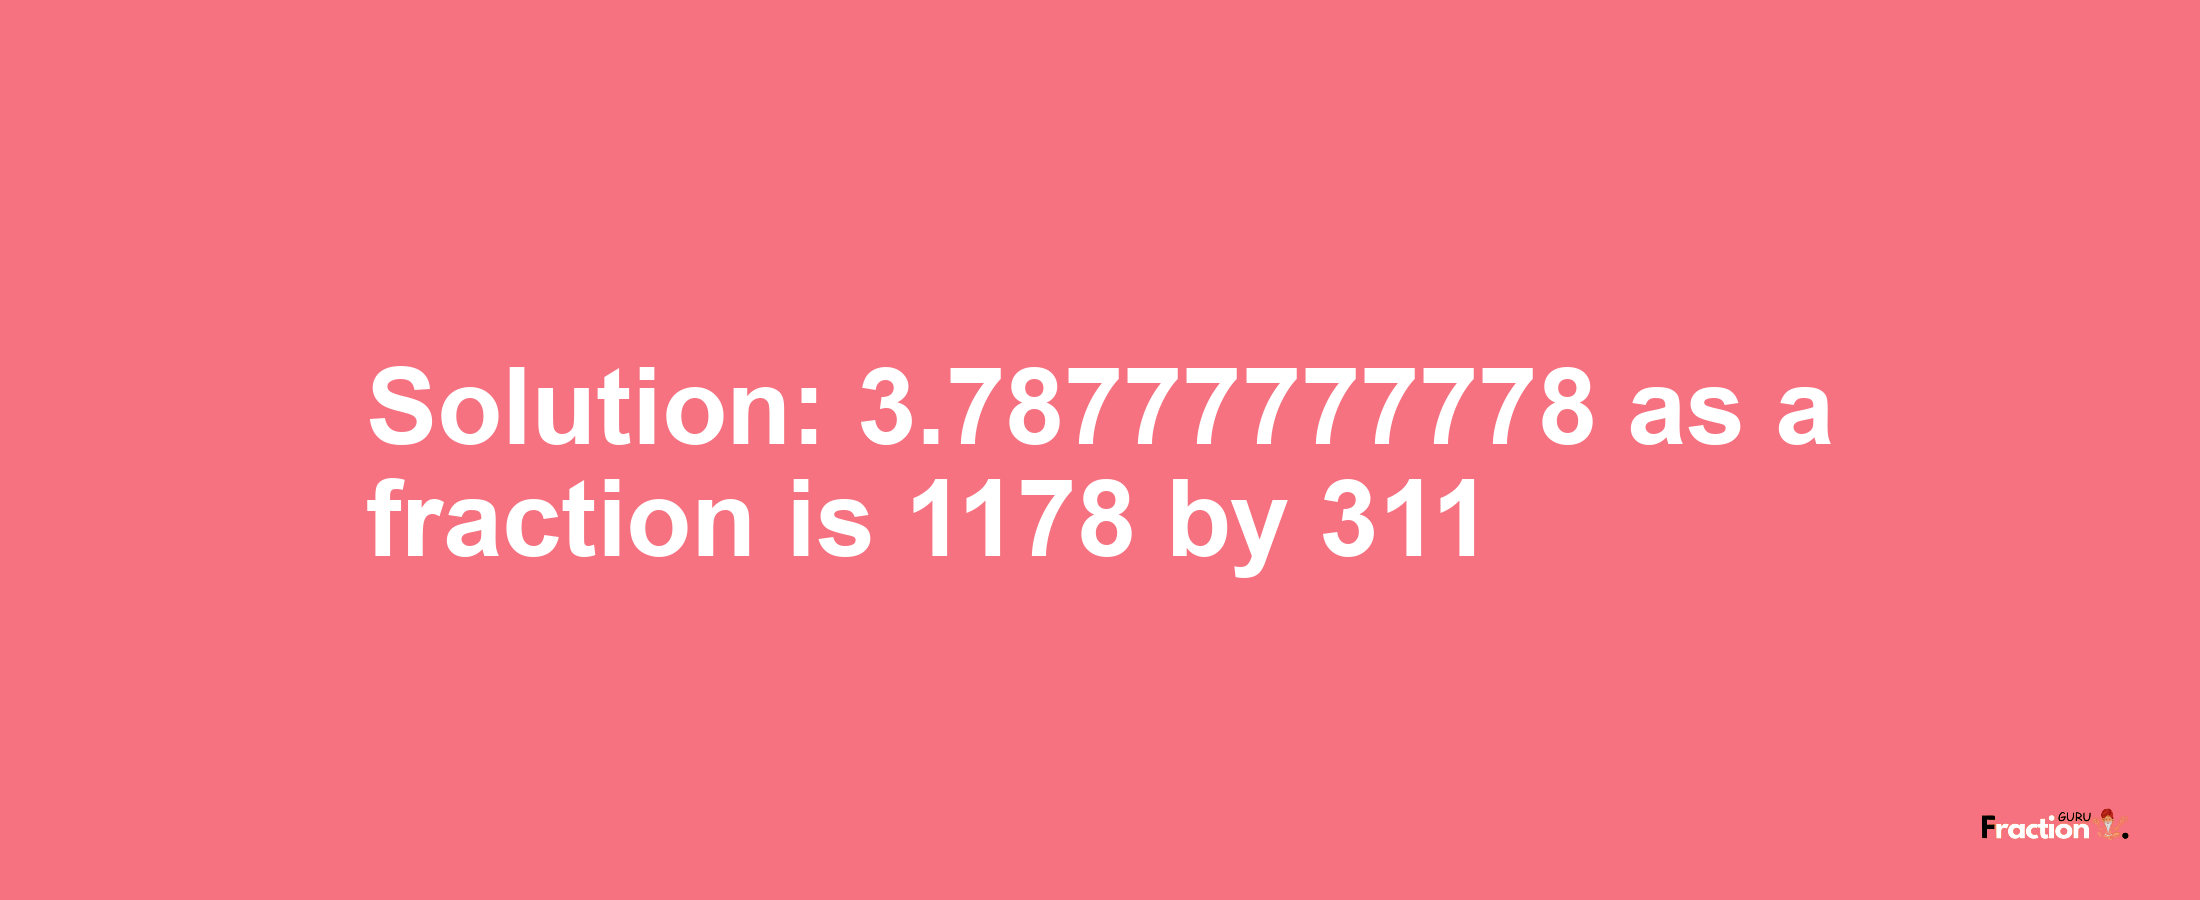 Solution:3.78777777778 as a fraction is 1178/311